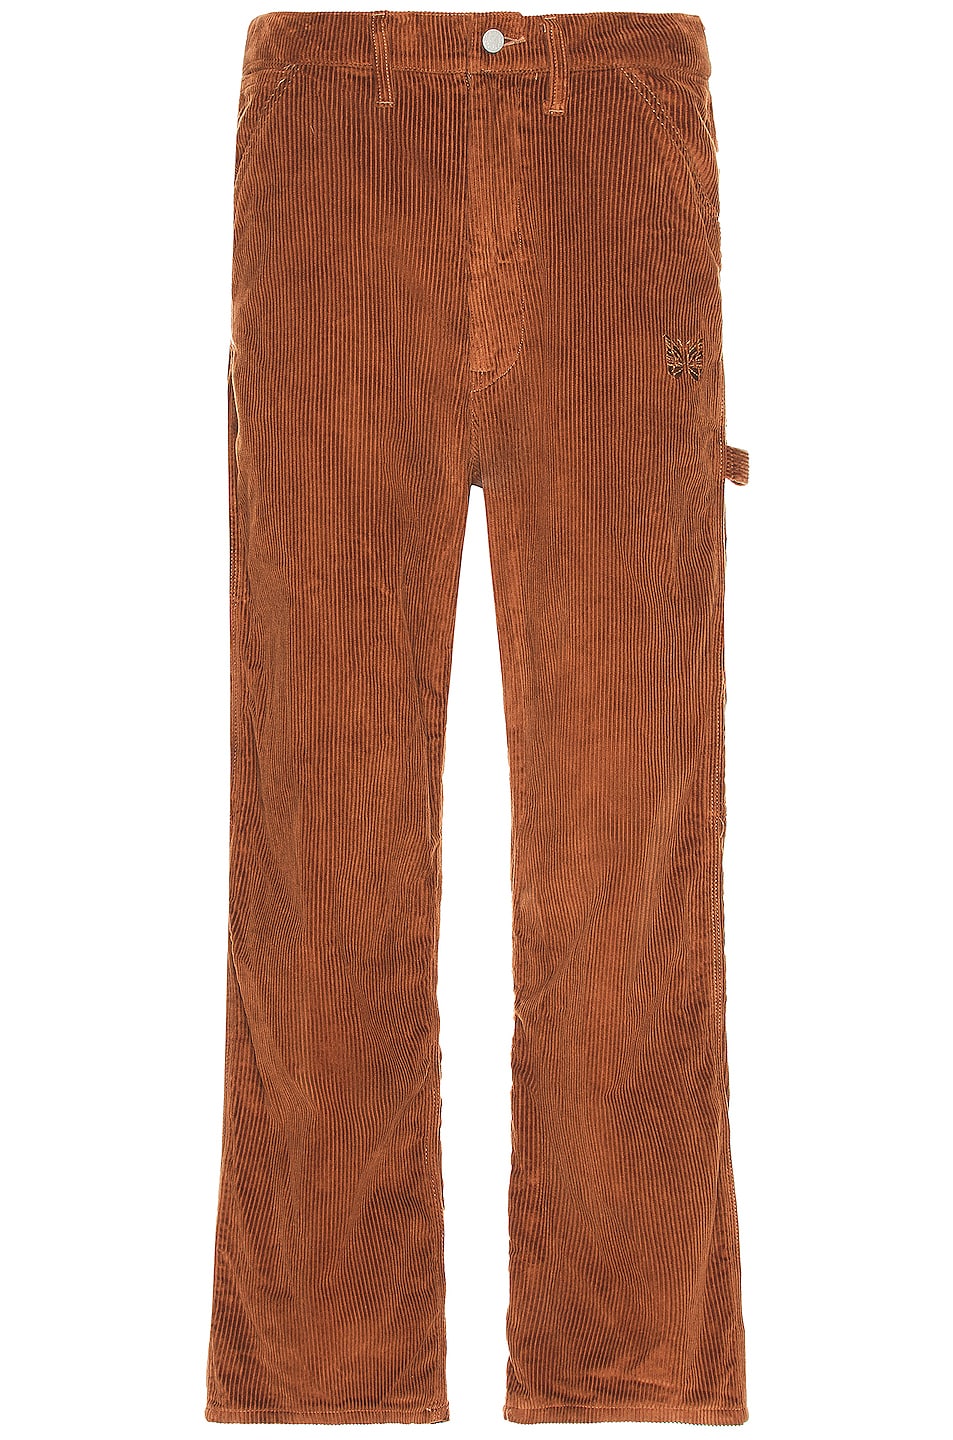 Image 1 of Needles x SMITH'S Painter Pant in Brown